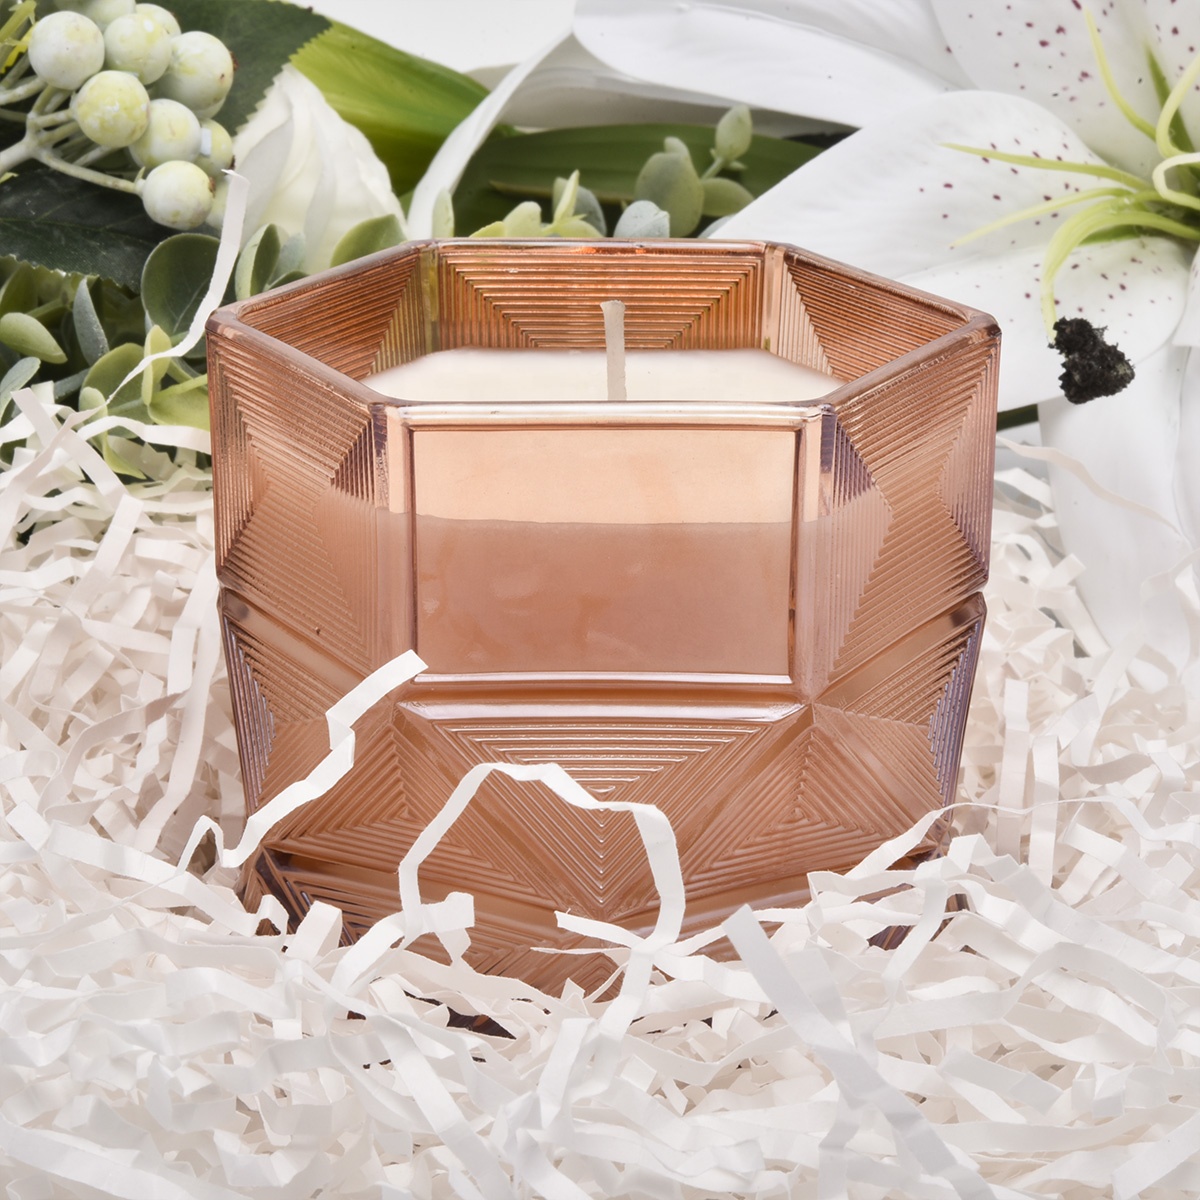 Luxury amber Hexagon decorative candle glass holder container